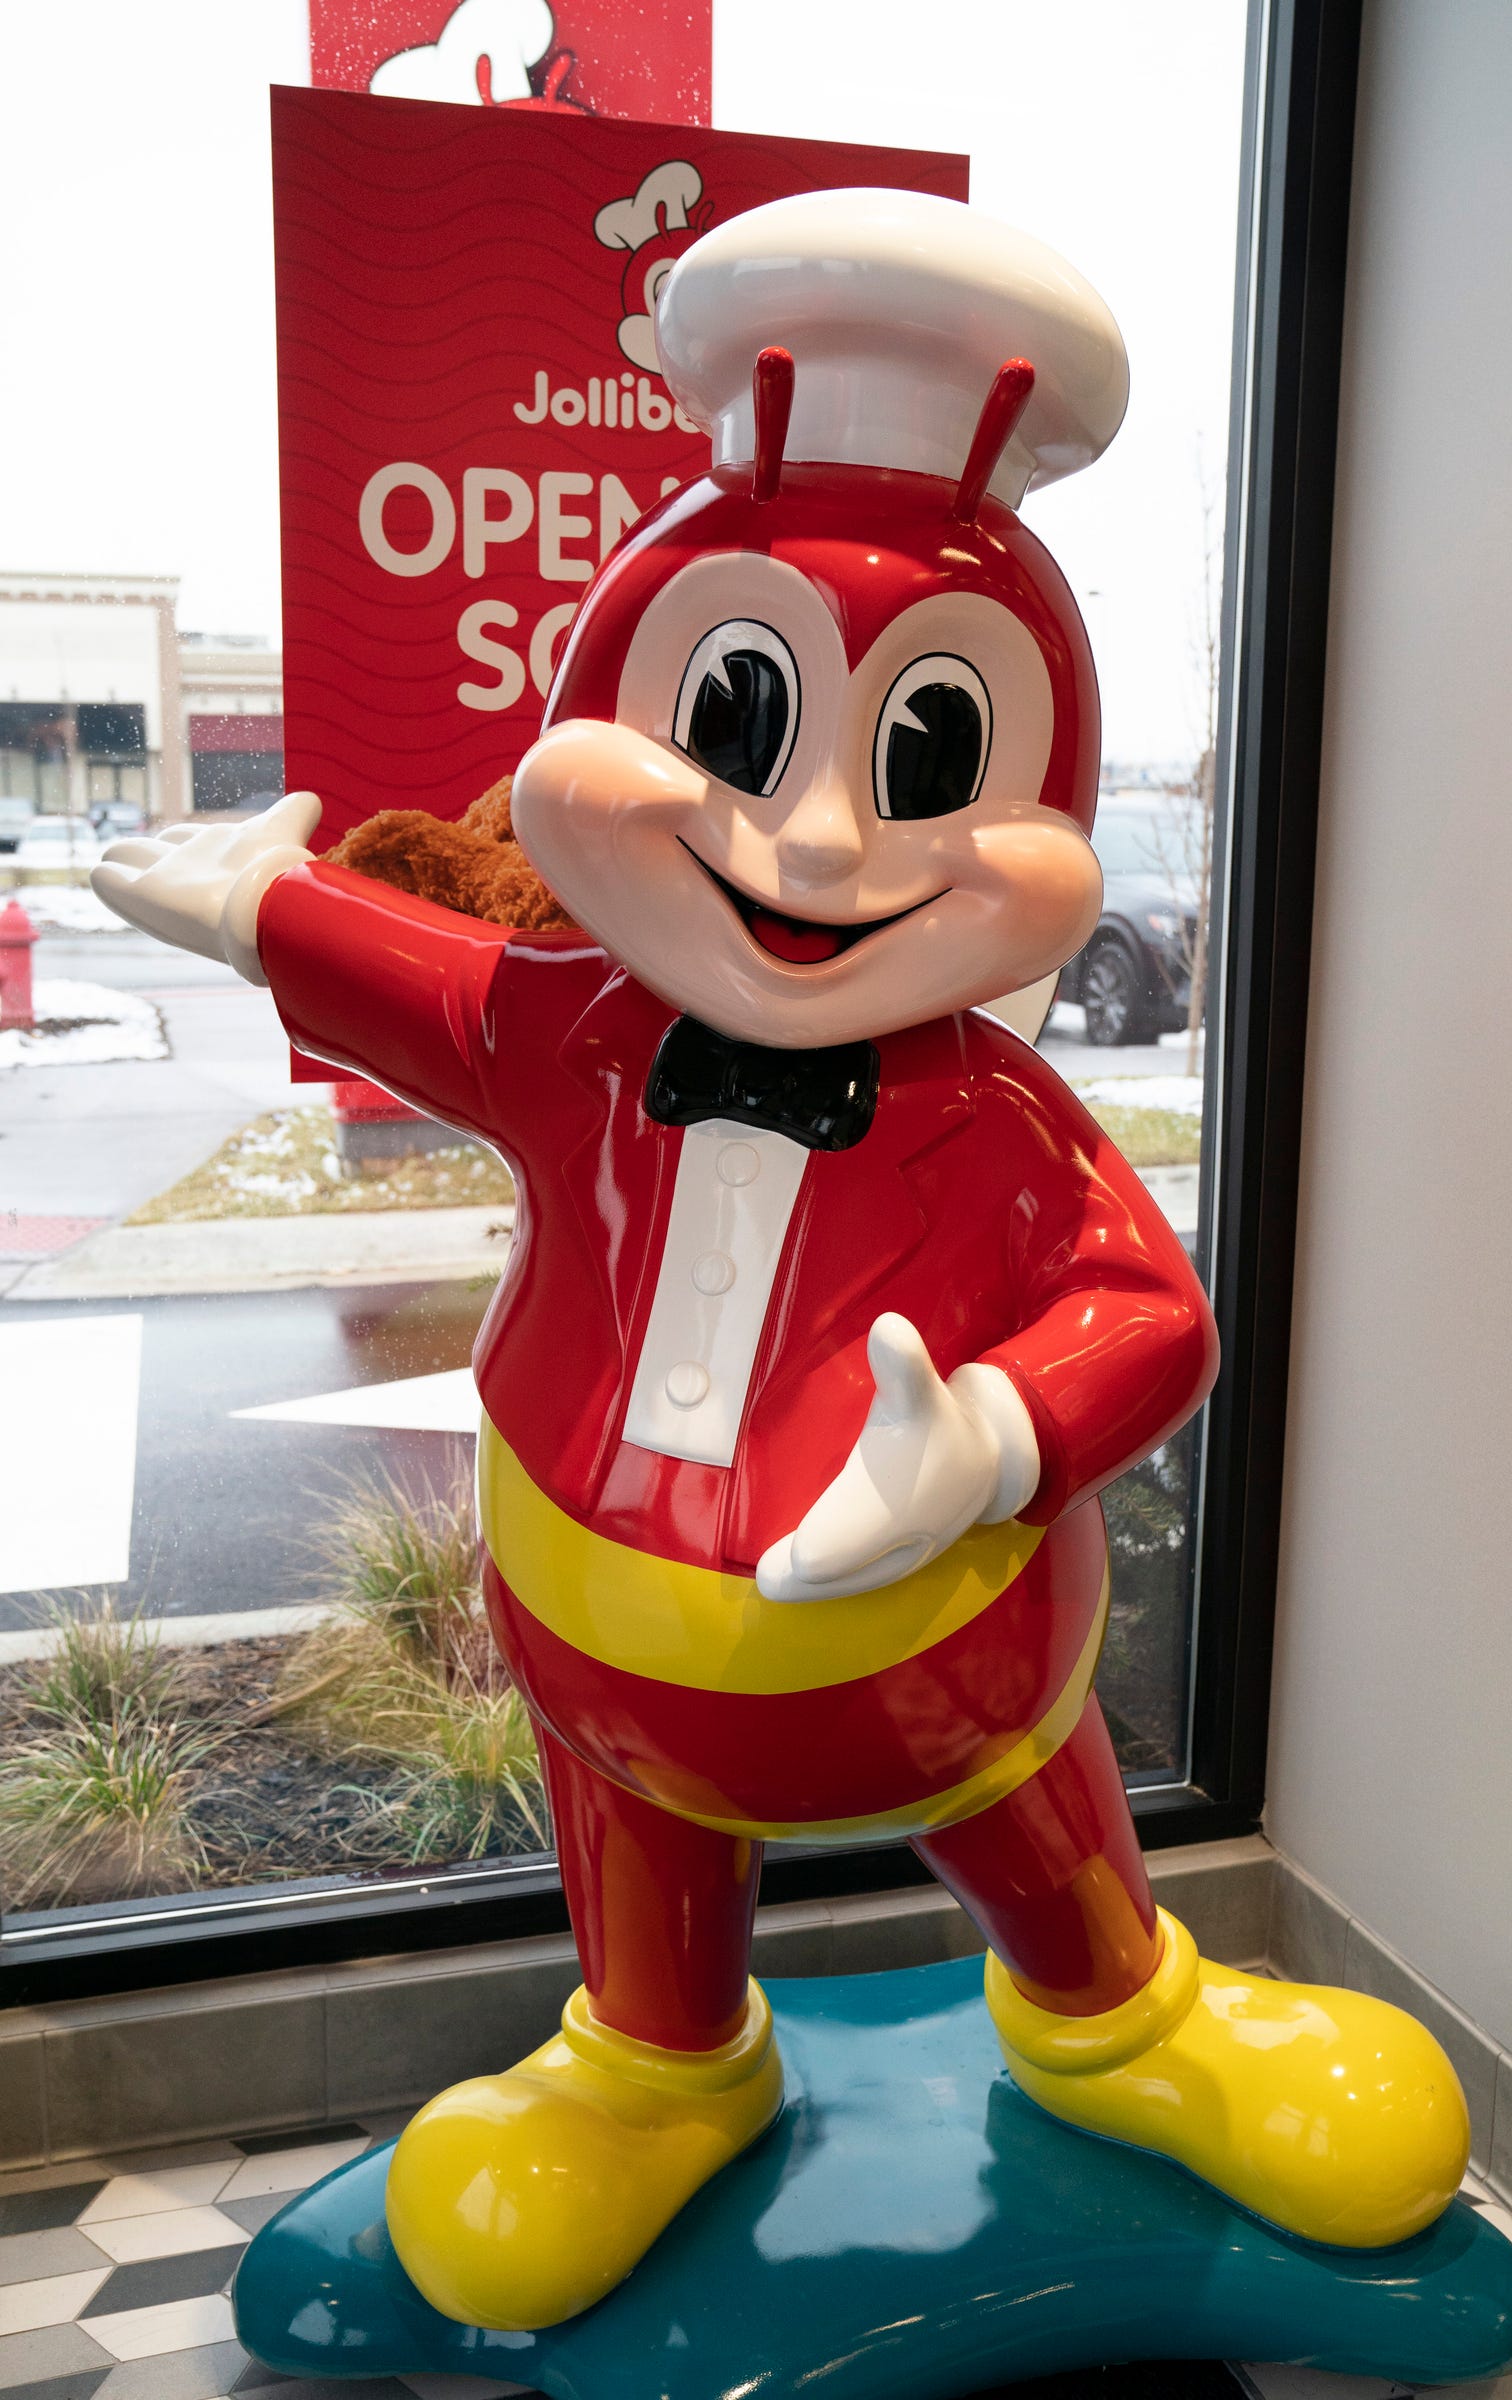 Jollibee's 1st Michigan location opens in Sterling Heights on Friday